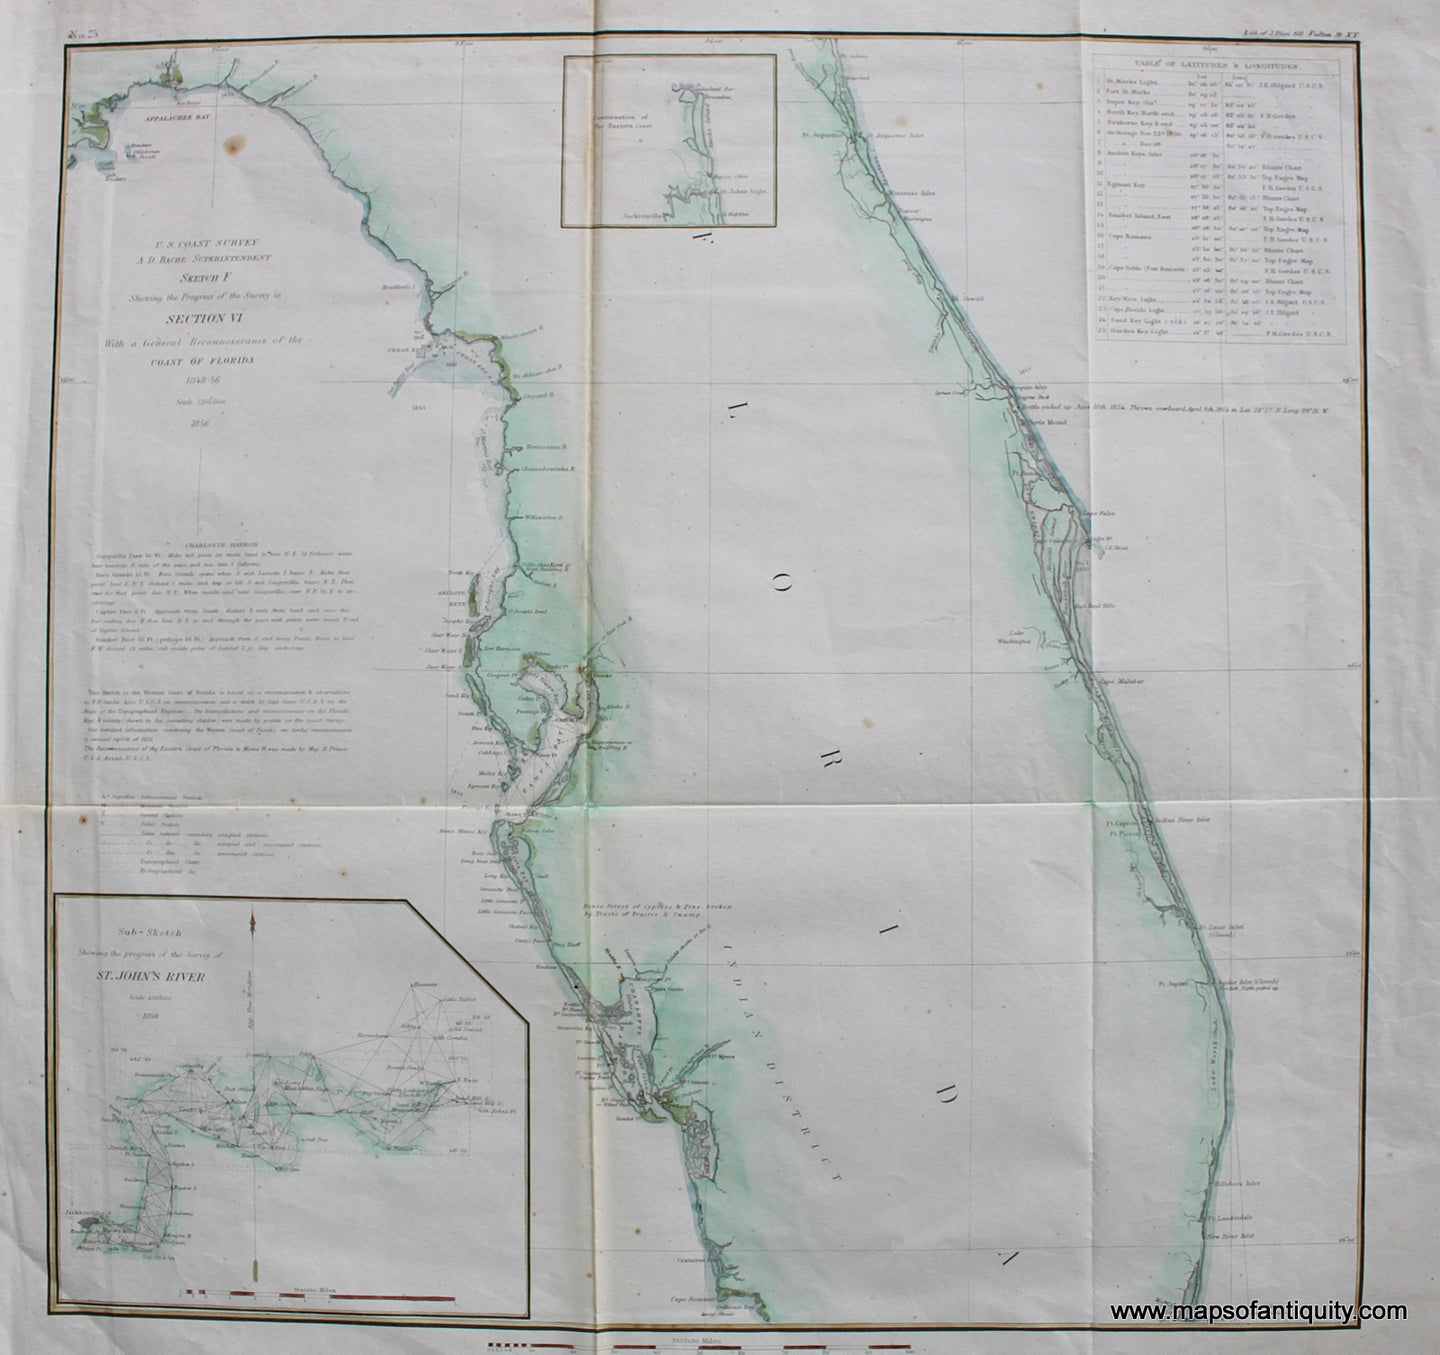 Hand-Colored-Antique-Coastal-Chart-Sketch-F-Showing-the-Progress-of-the-Survey-in-Section-VI-With-a-General-Reconnaissance-of-the-Coast-of-Florida-**********-United-States-Florida-1856-U.S.-Coast-Survey-Maps-Of-Antiquity